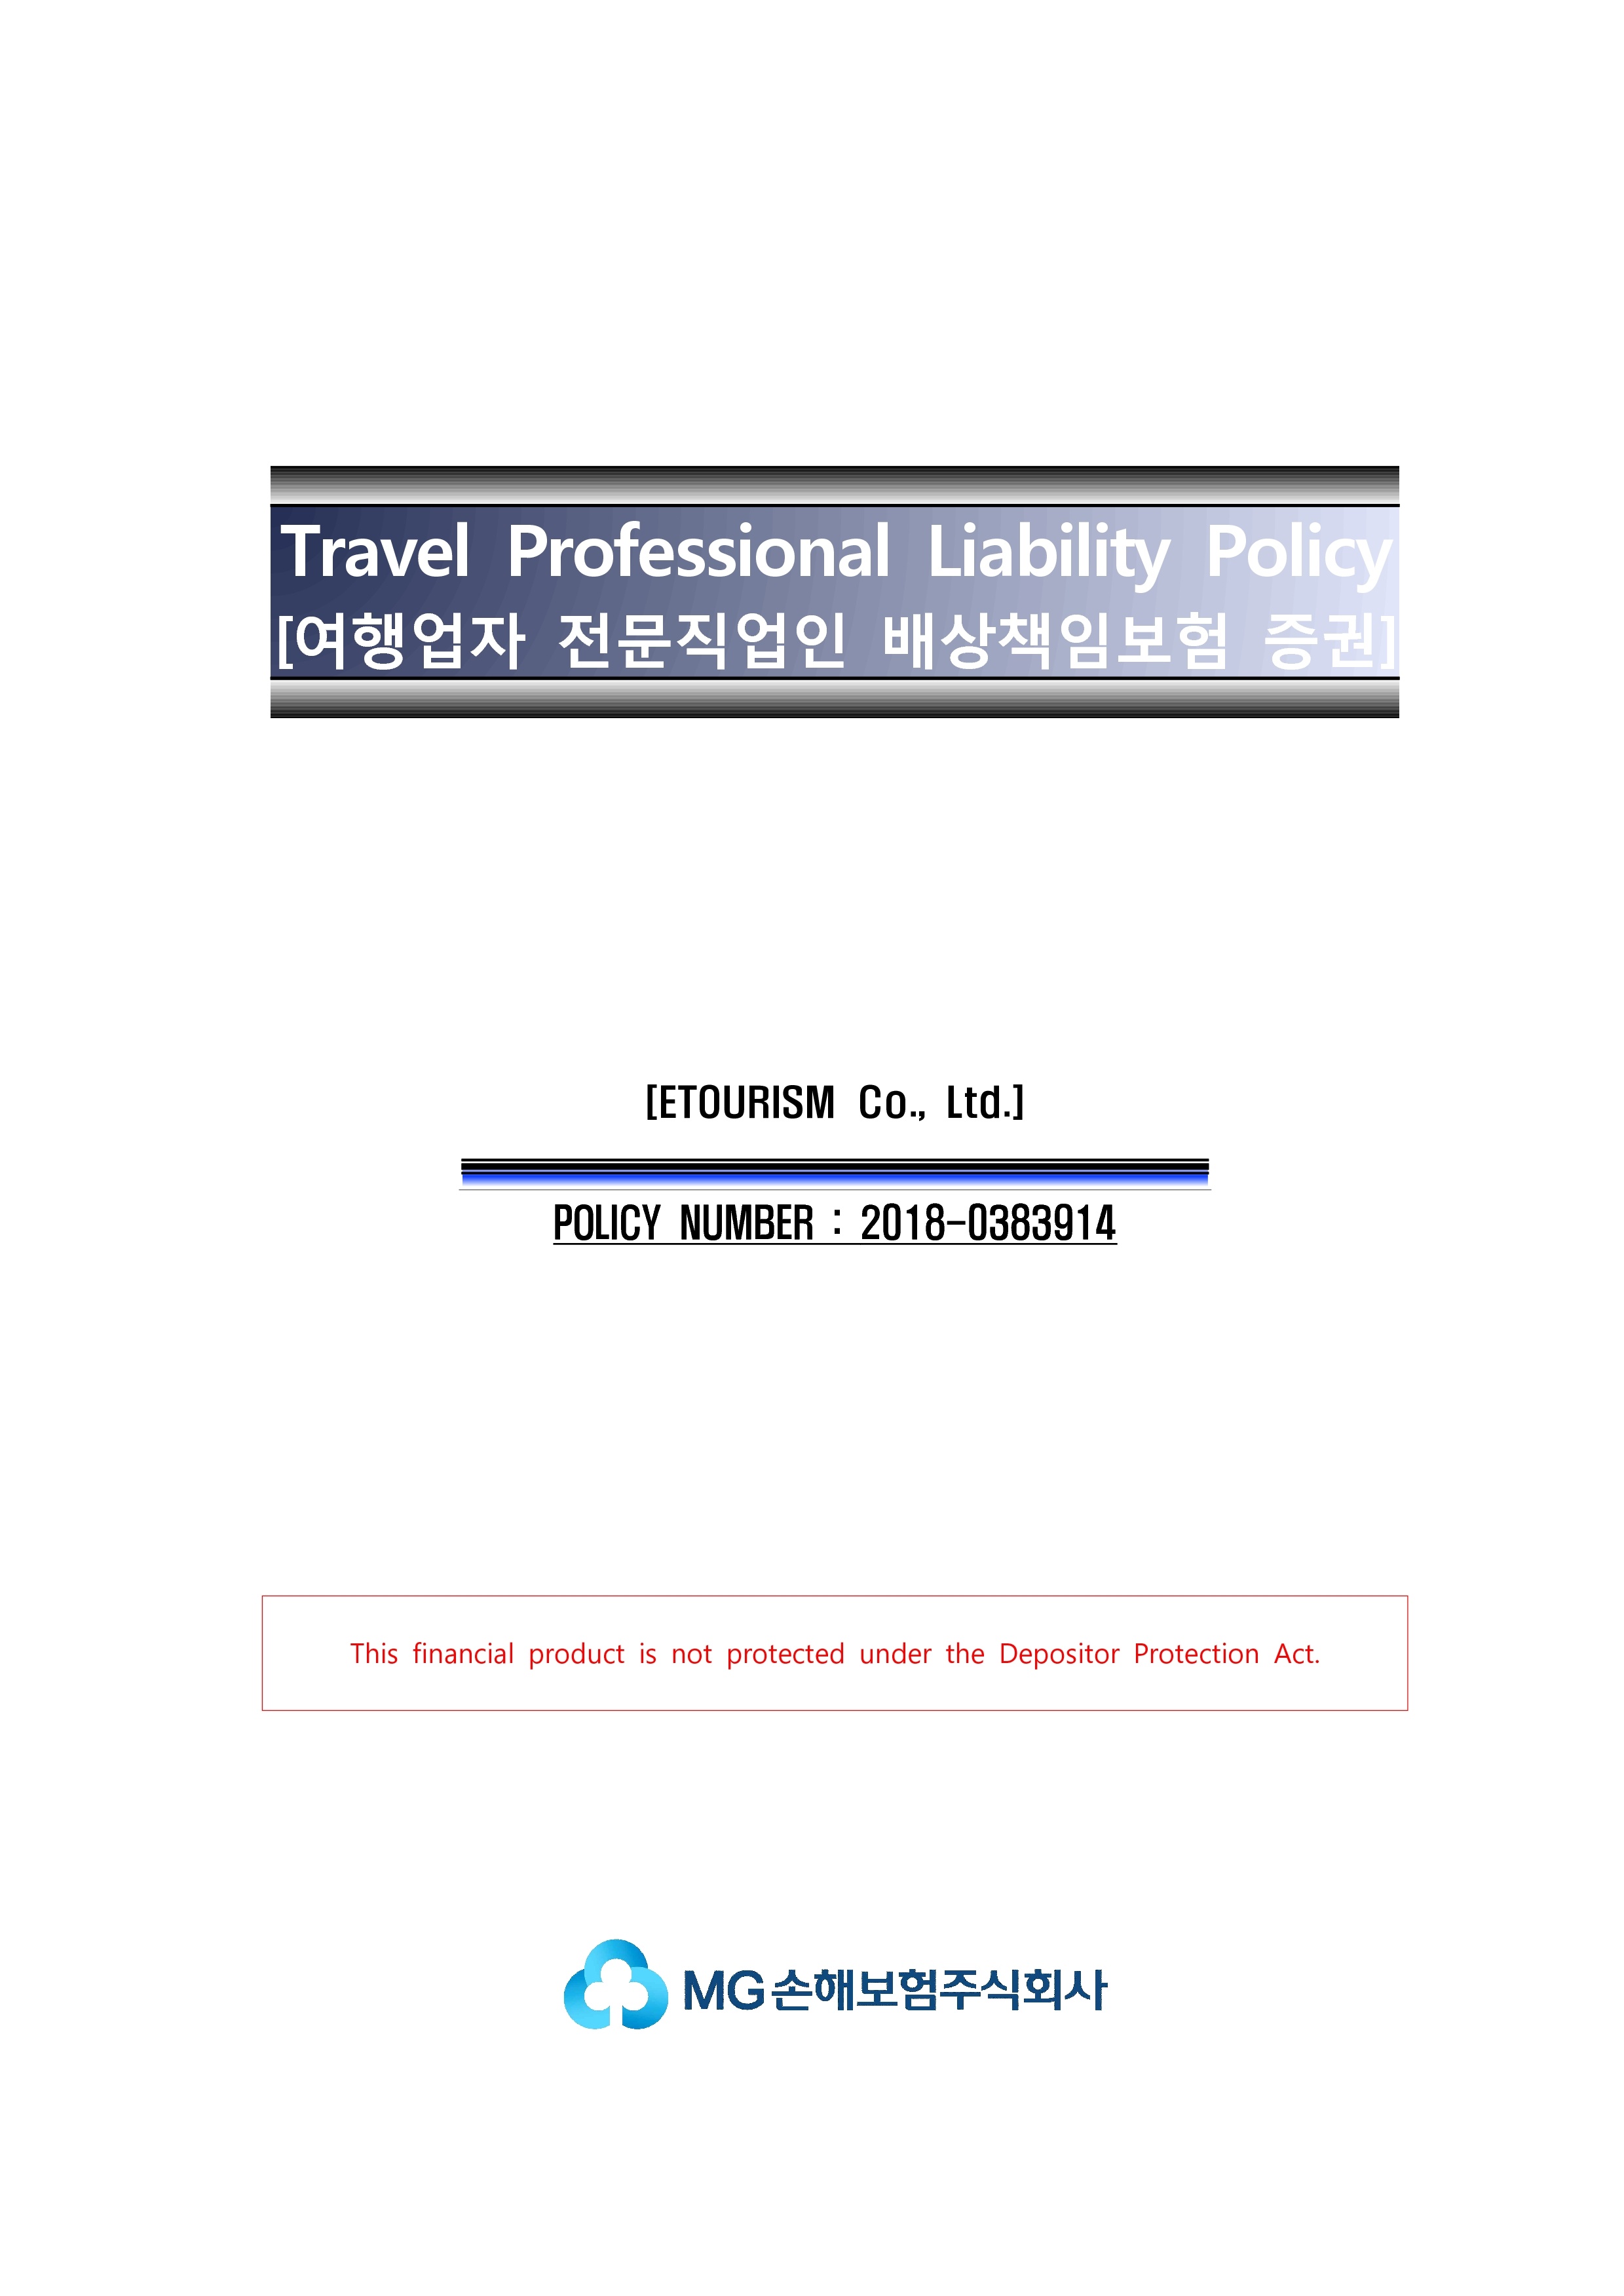 Travel Professional Liability Policy (1)